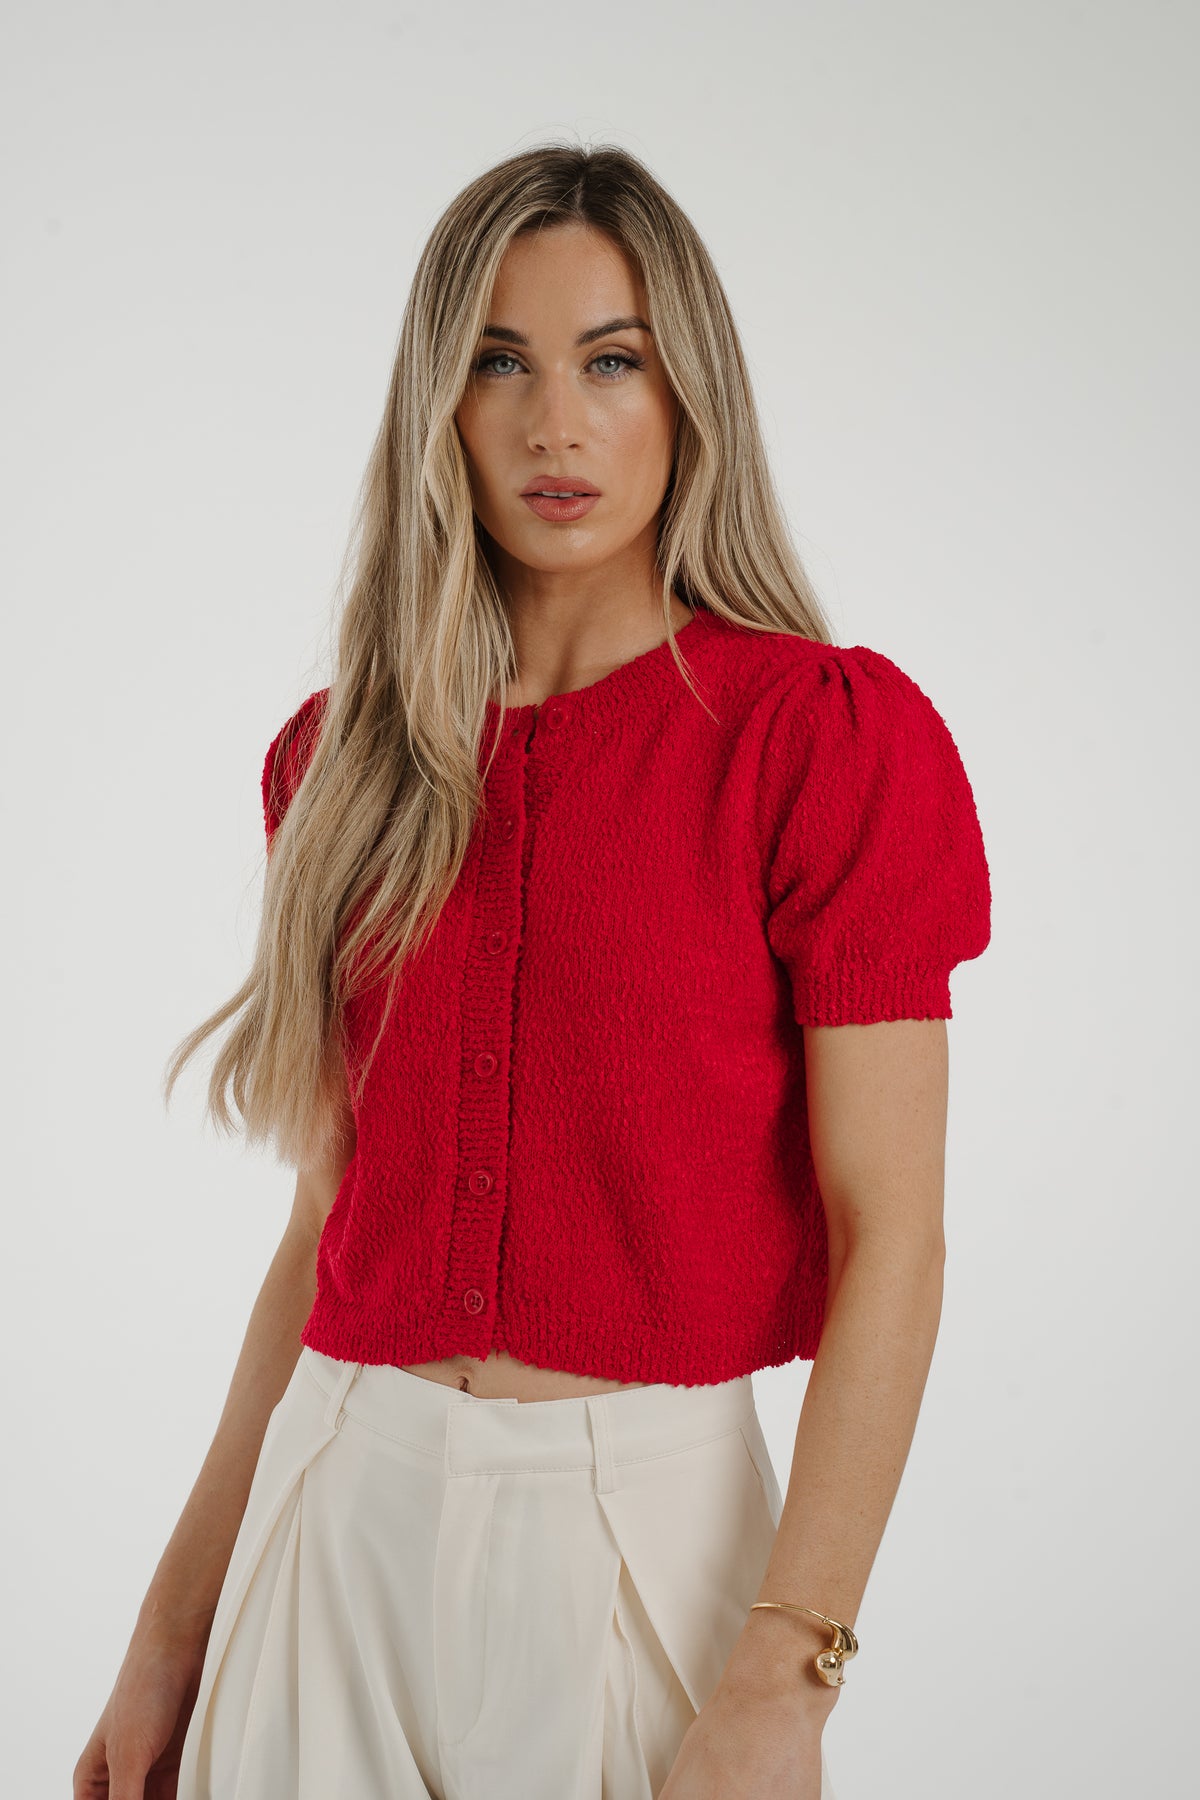 Taylor Textured Cardigan In Red